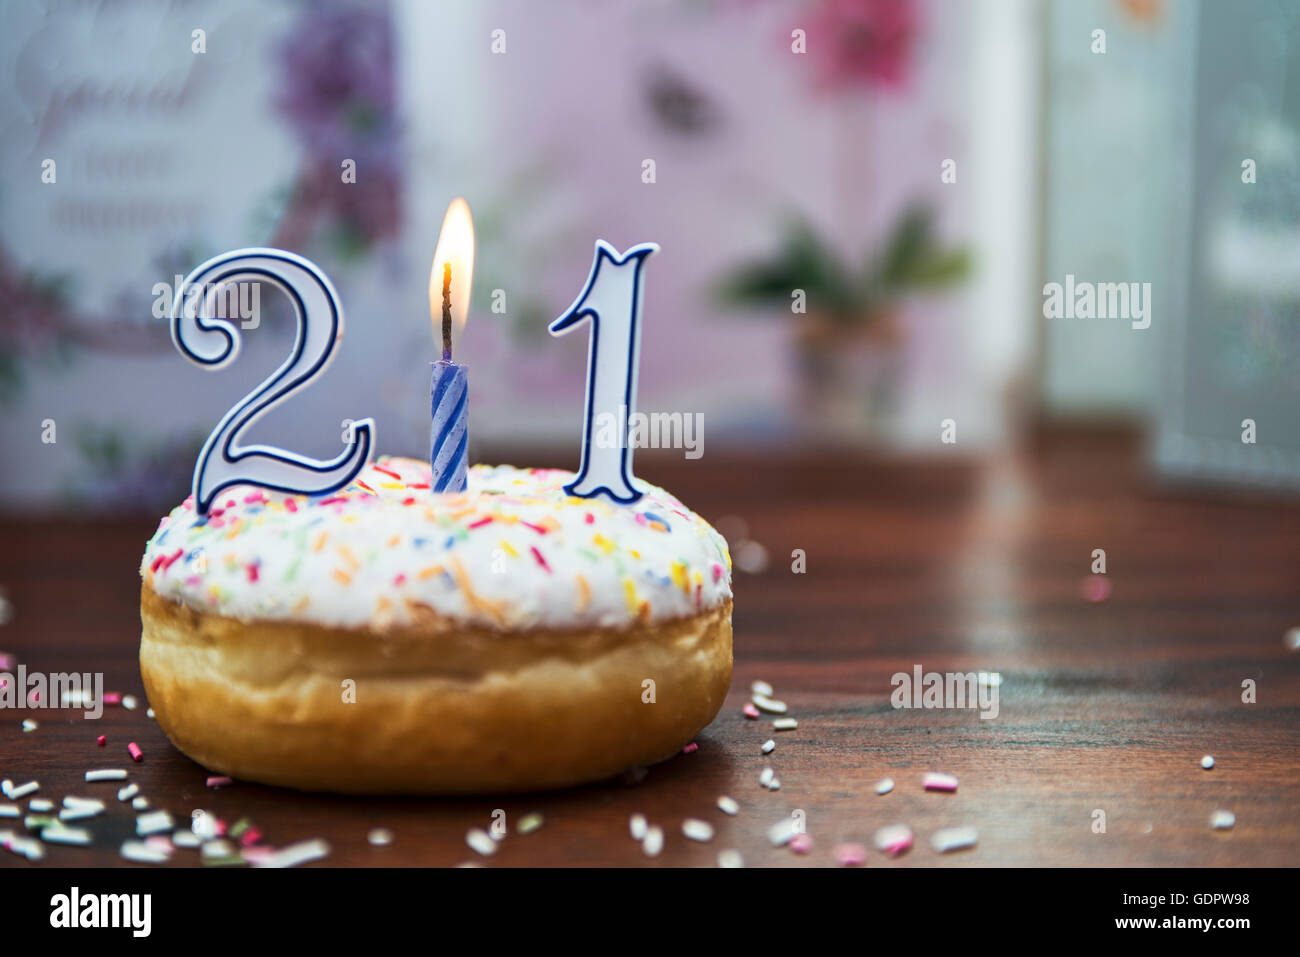 Single birthday donut and candle Stock Photo